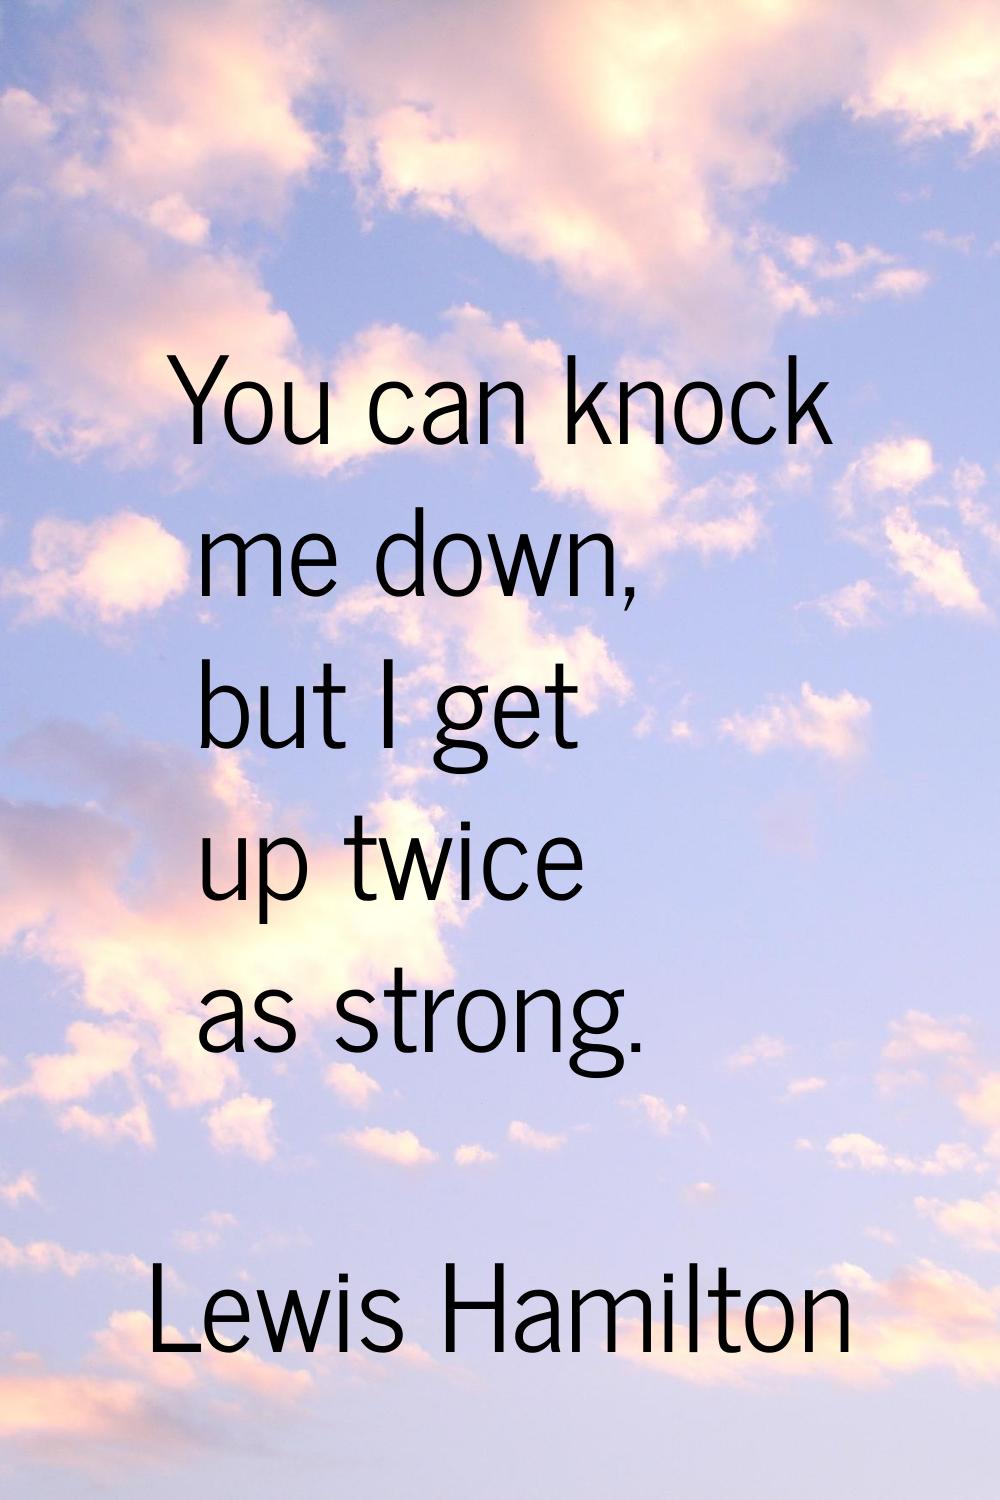 You can knock me down, but I get up twice as strong.